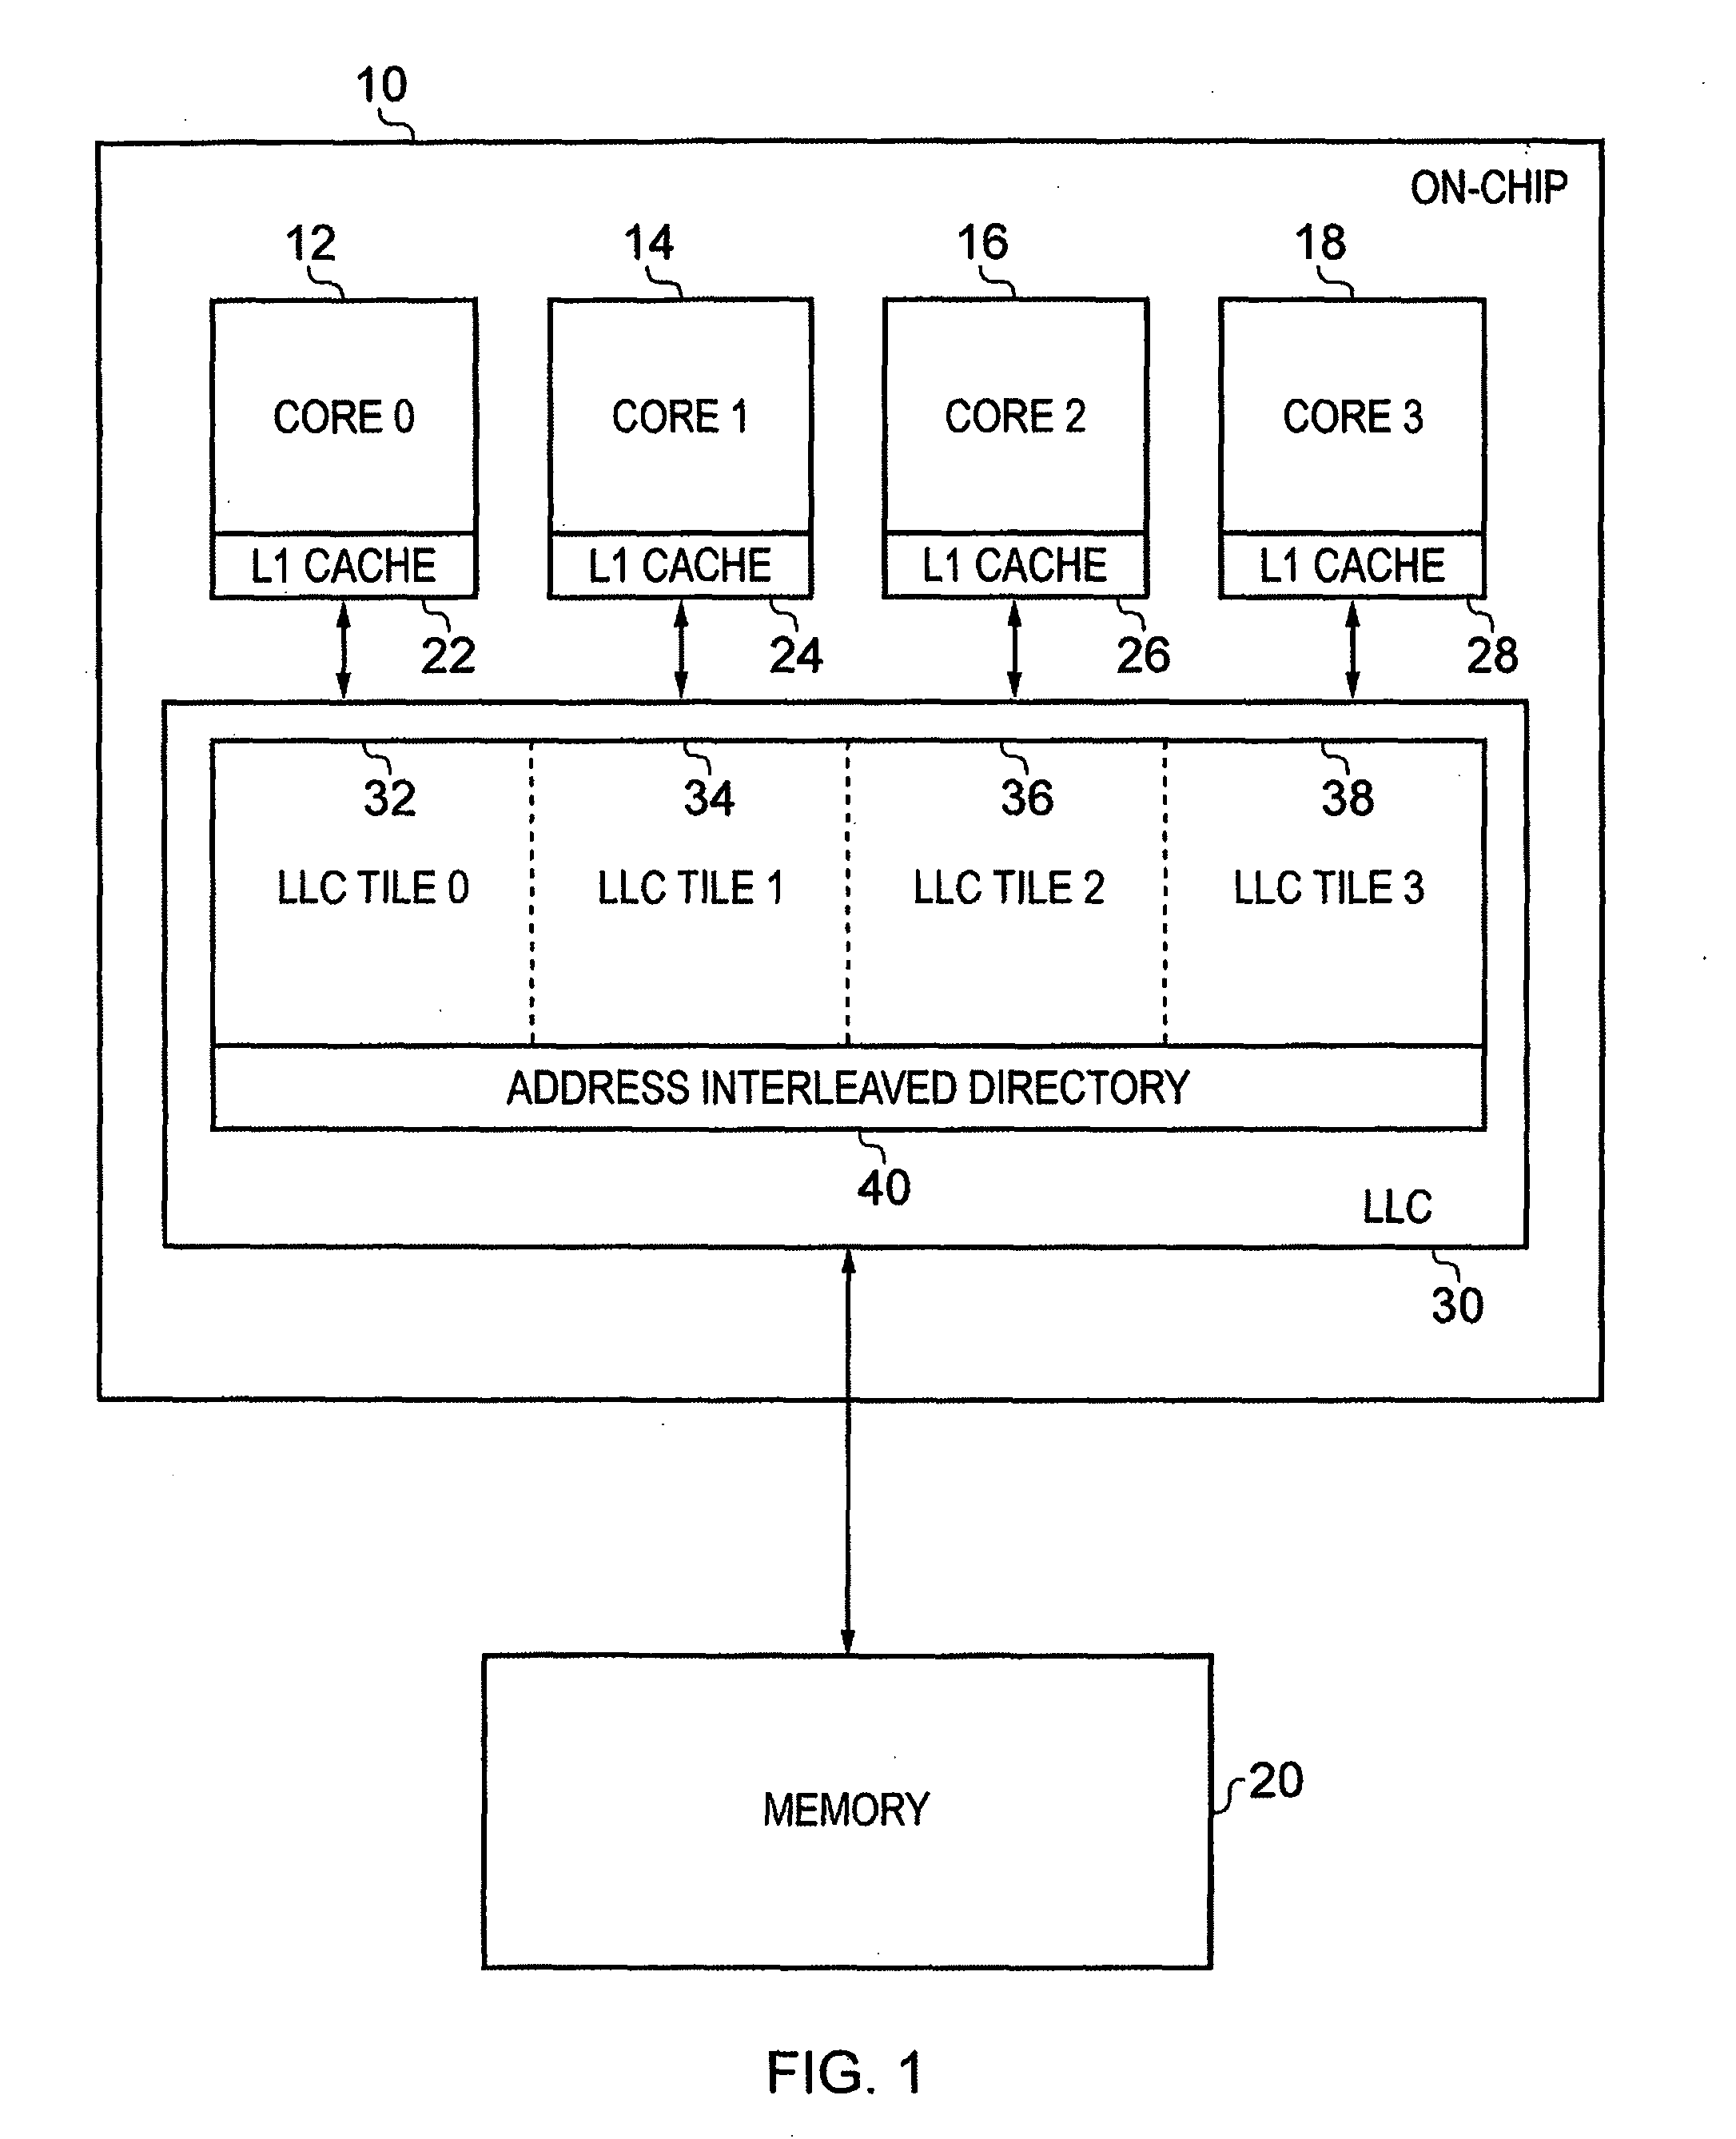 Data processing apparatus having a cache configured to perform tag lookup and data access in parallel, and a method of operating the data processing apparatus